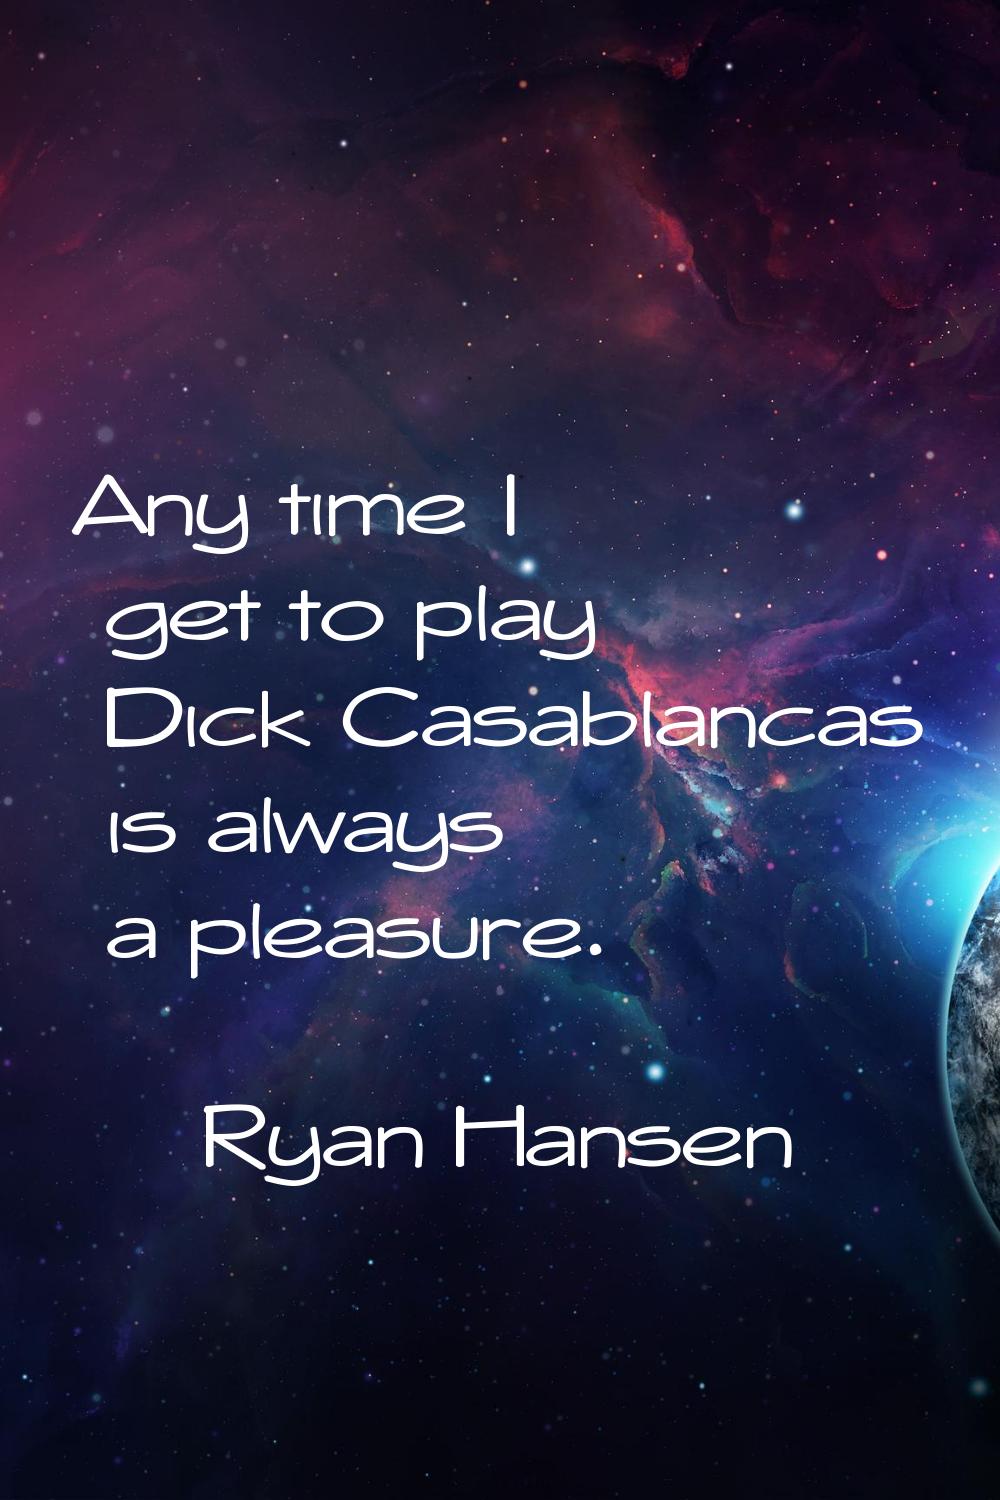 Any time I get to play Dick Casablancas is always a pleasure.